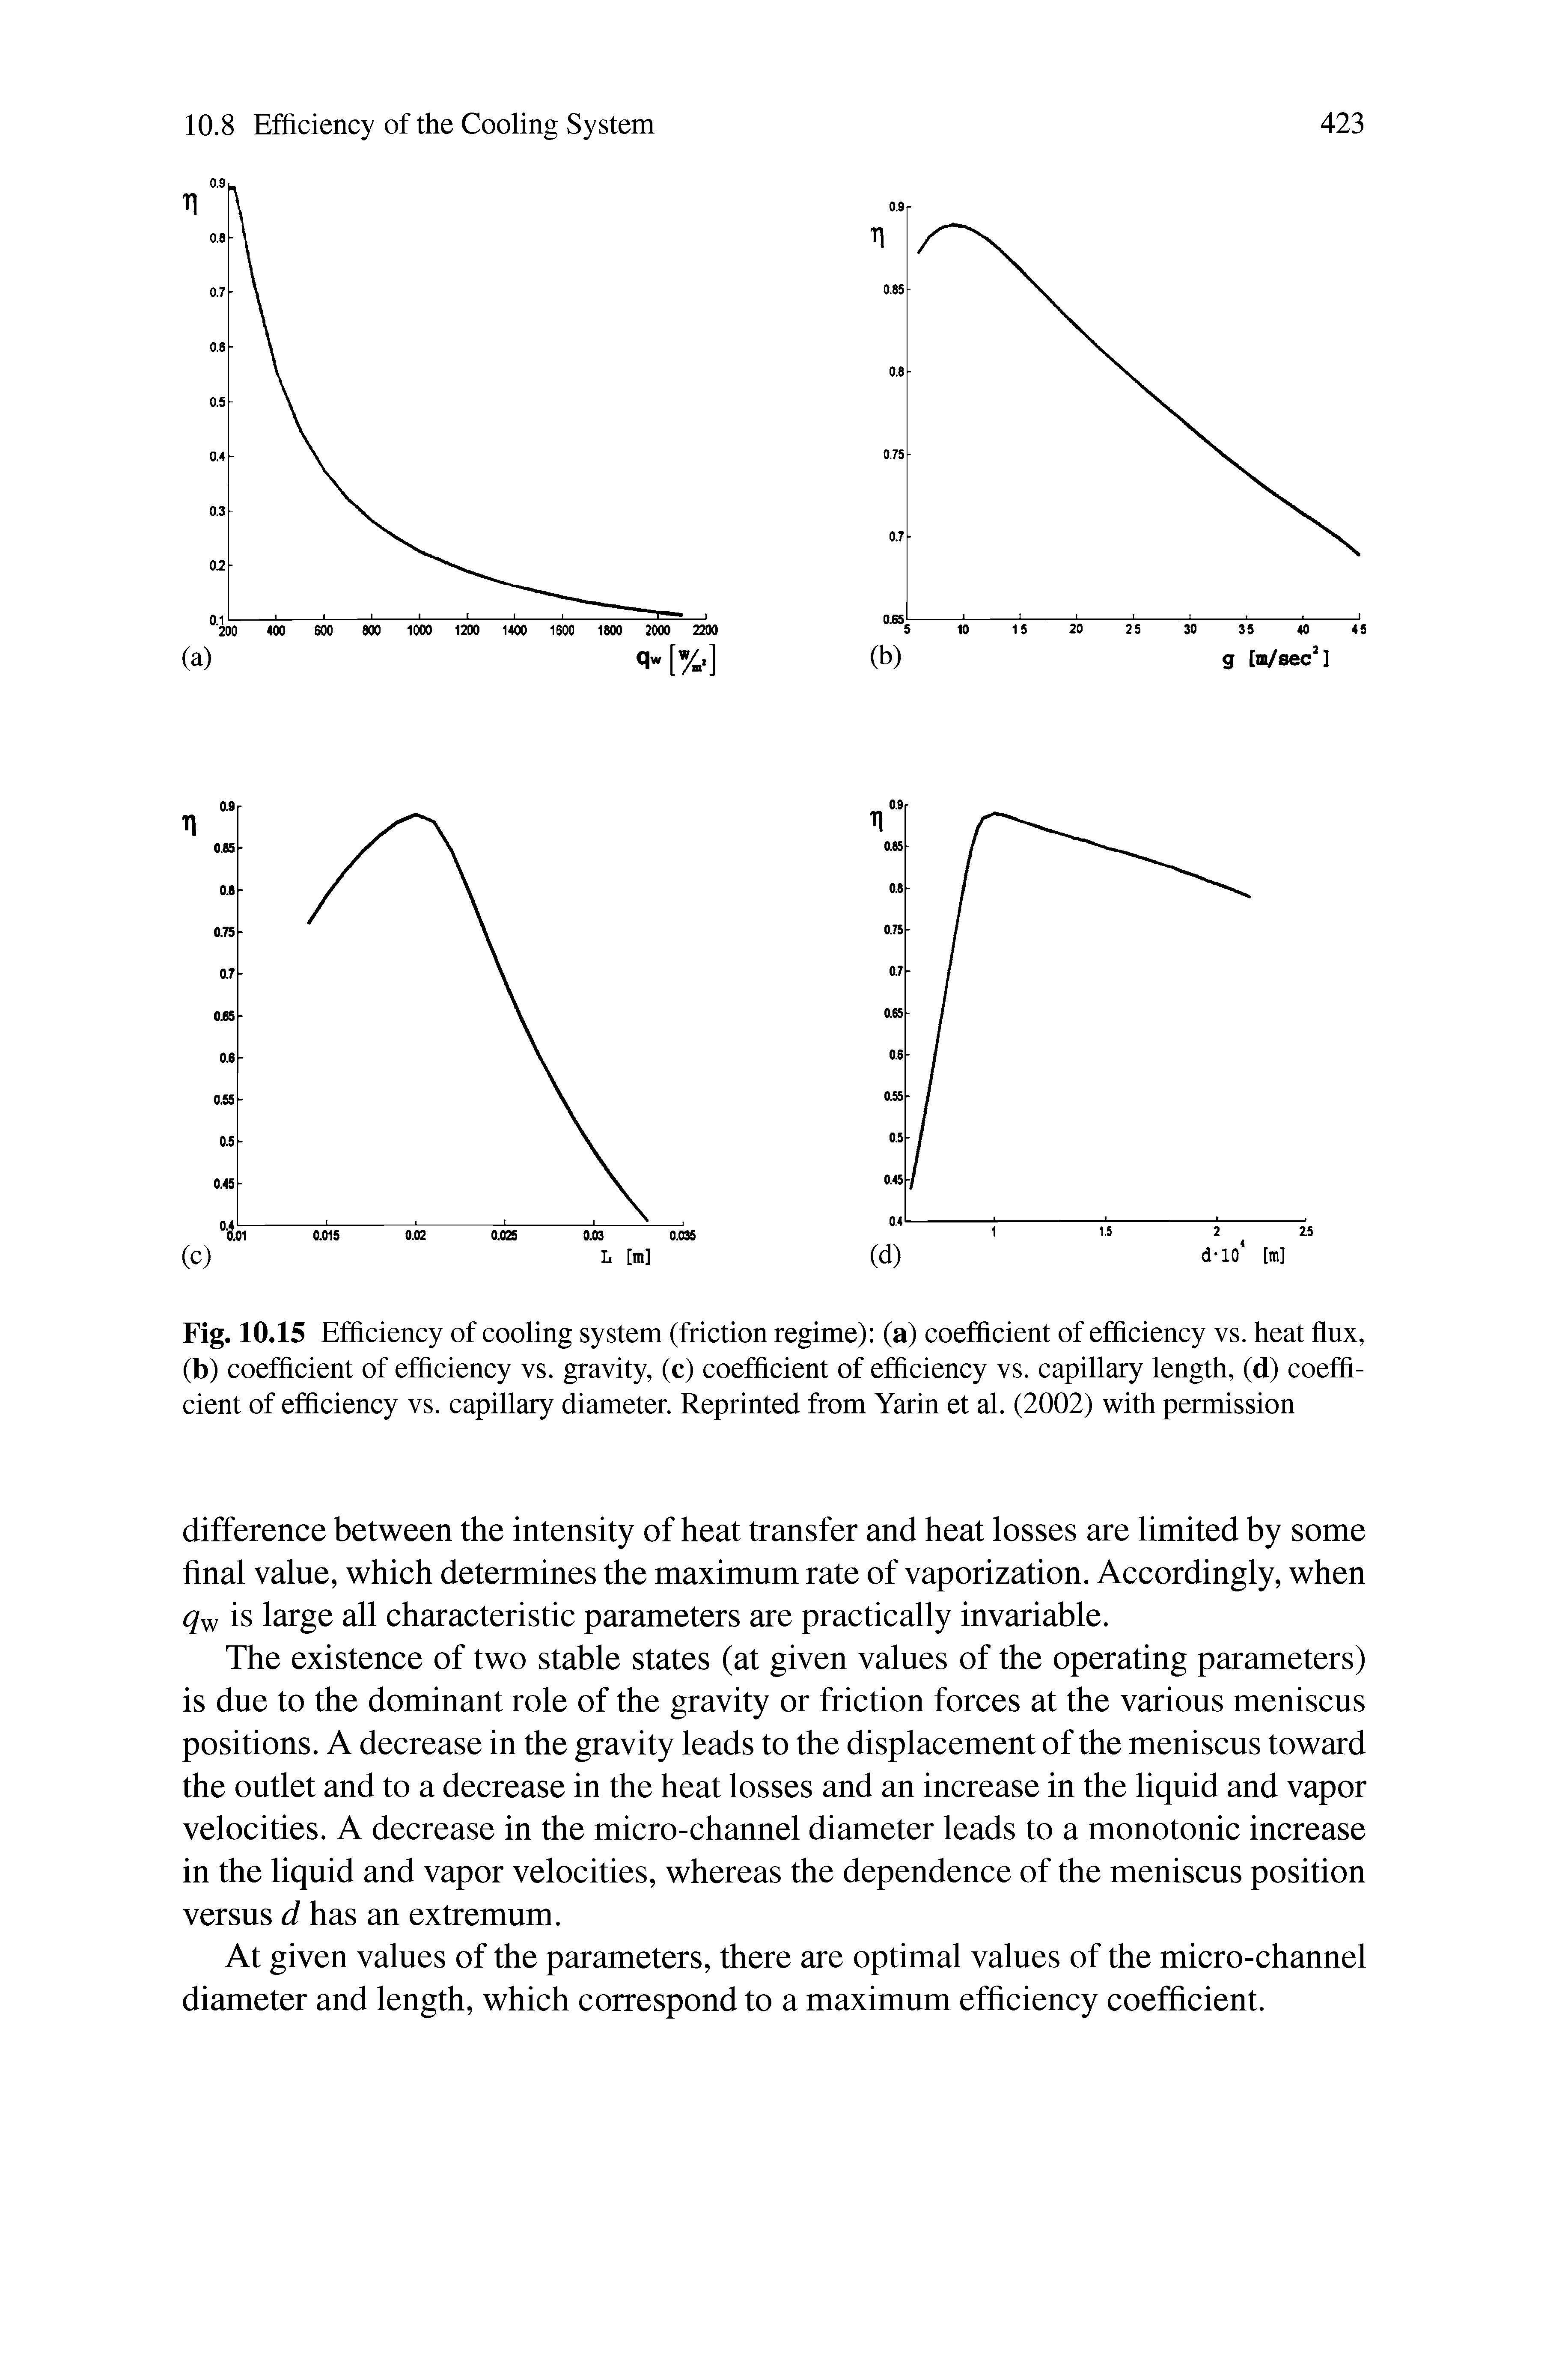 Fig. 10.15 Efficiency of cooling system (friction regime) (a) coefficient of efficiency vs. heat flux, (b) coefficient of efficiency vs. gravity, (c) coefficient of efficiency vs. capillary length, (d) coefficient of efficiency vs. capillary diameter. Reprinted from Yarin et al. (2002) with permission...